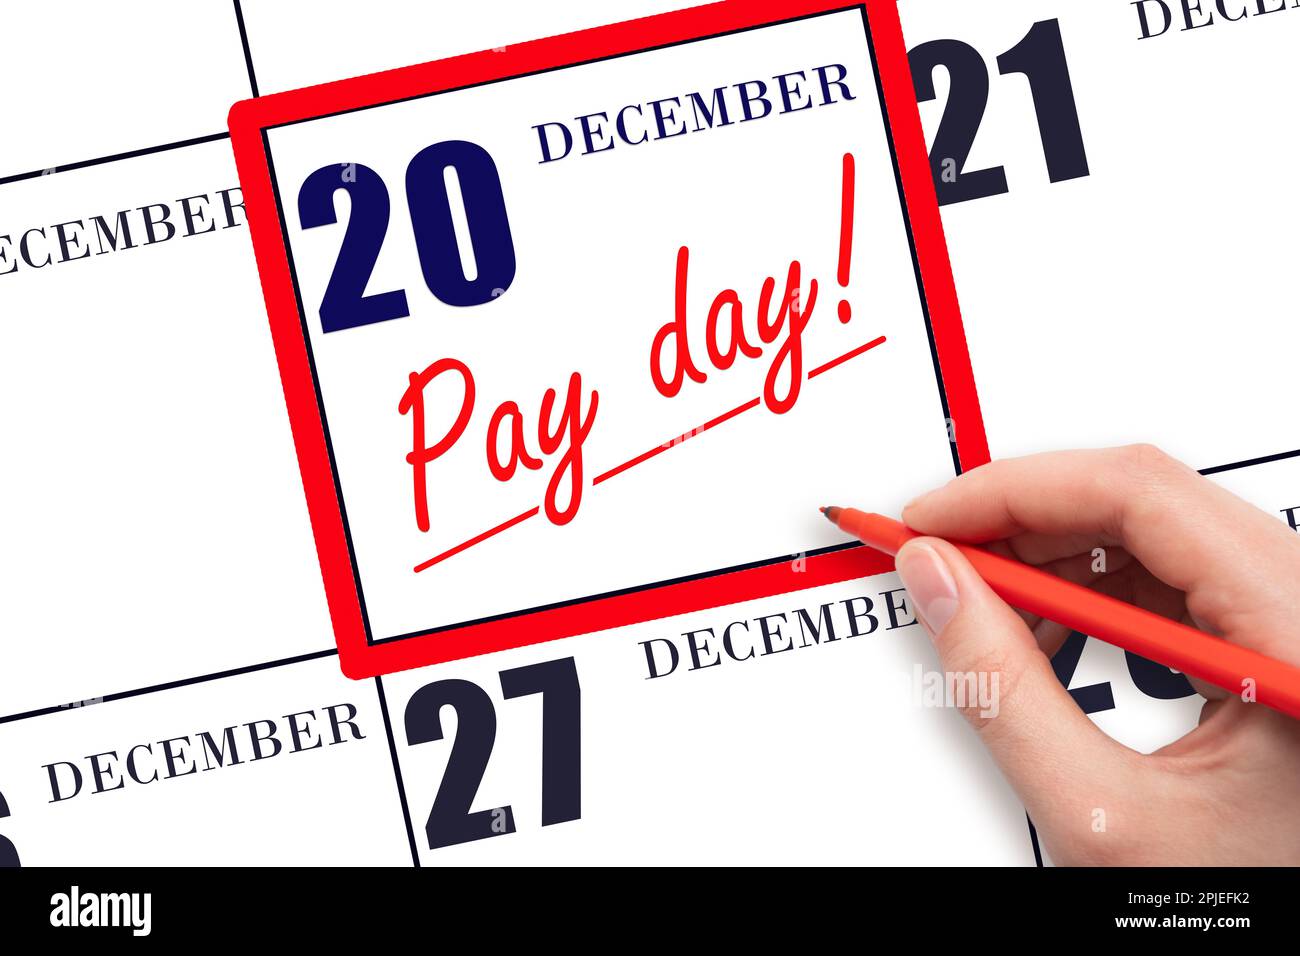 20th day of December. Hand writing text PAY DATE on calendar date December 20 and underline it. Payment due date. Reminder concept of payment. Winter Stock Photo